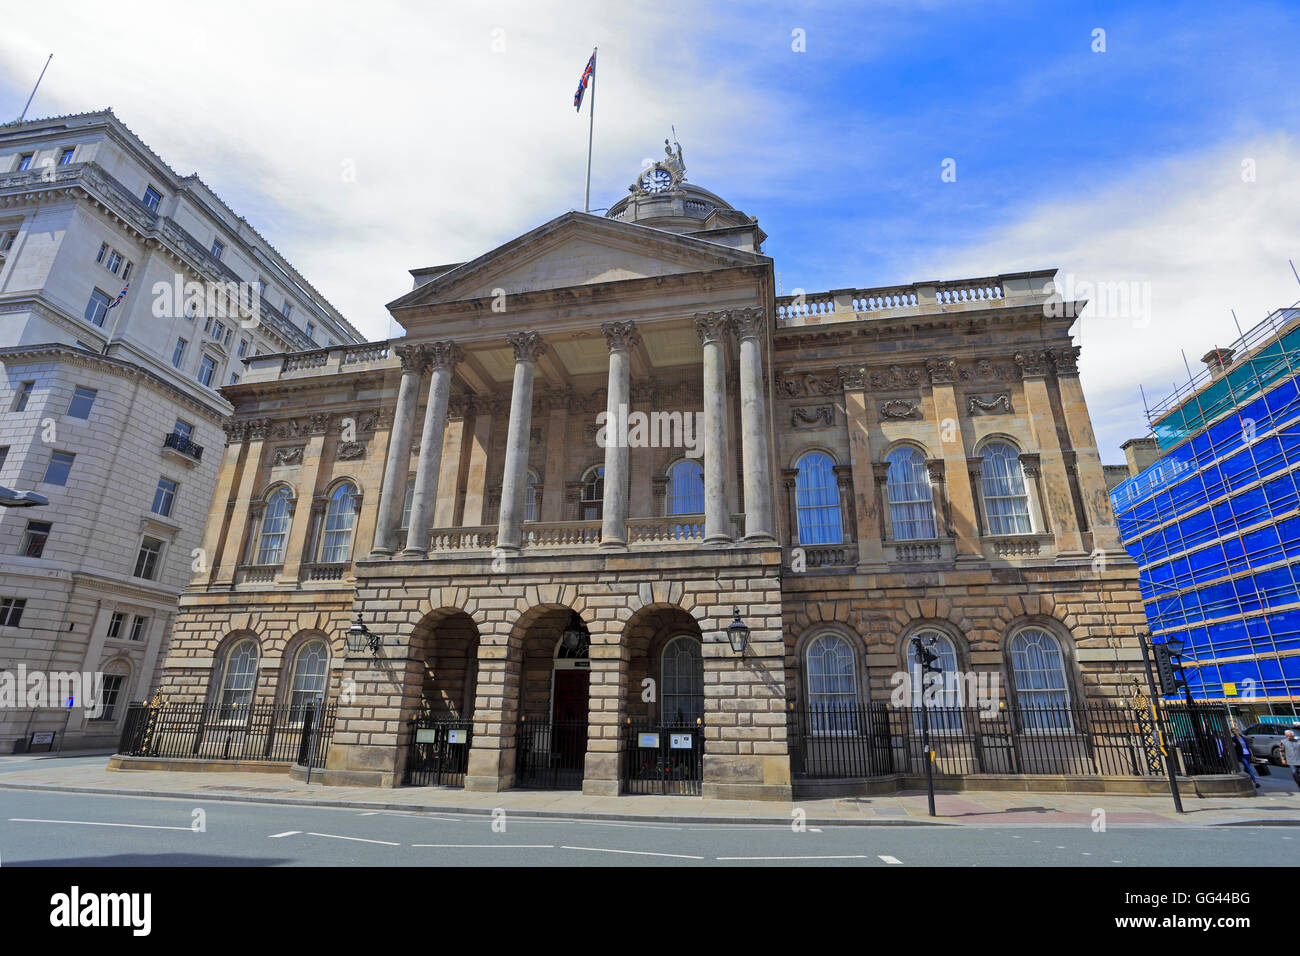 Town Hall, Liverpool, Merseyside, England, UK, Banque D'Images